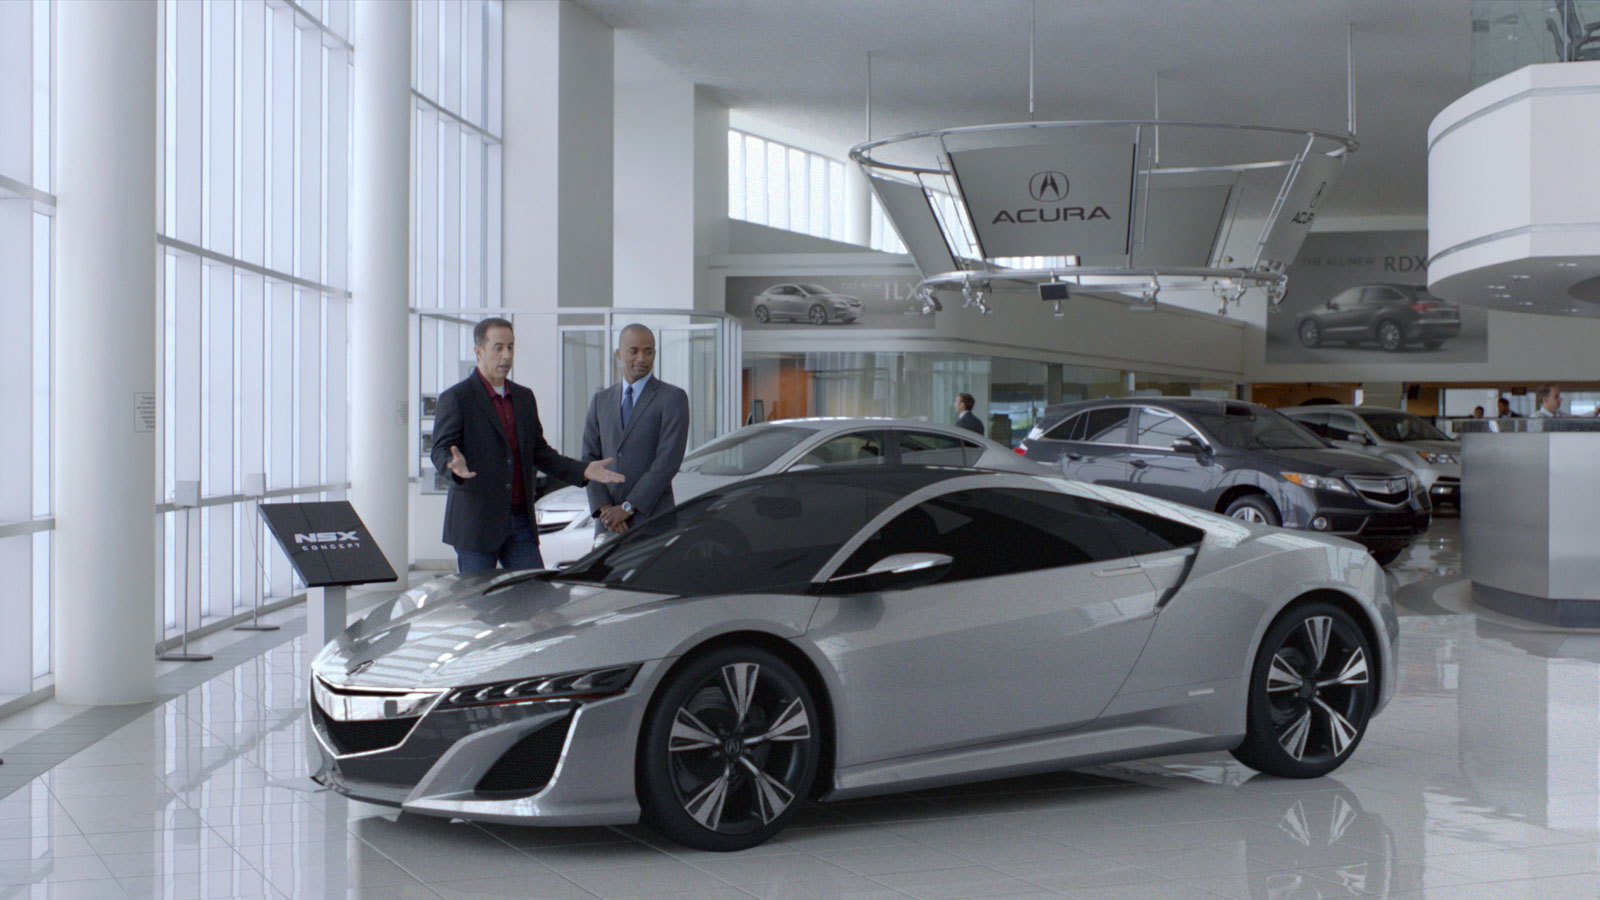 Jerry Seinfeld and the Acura NSX concept